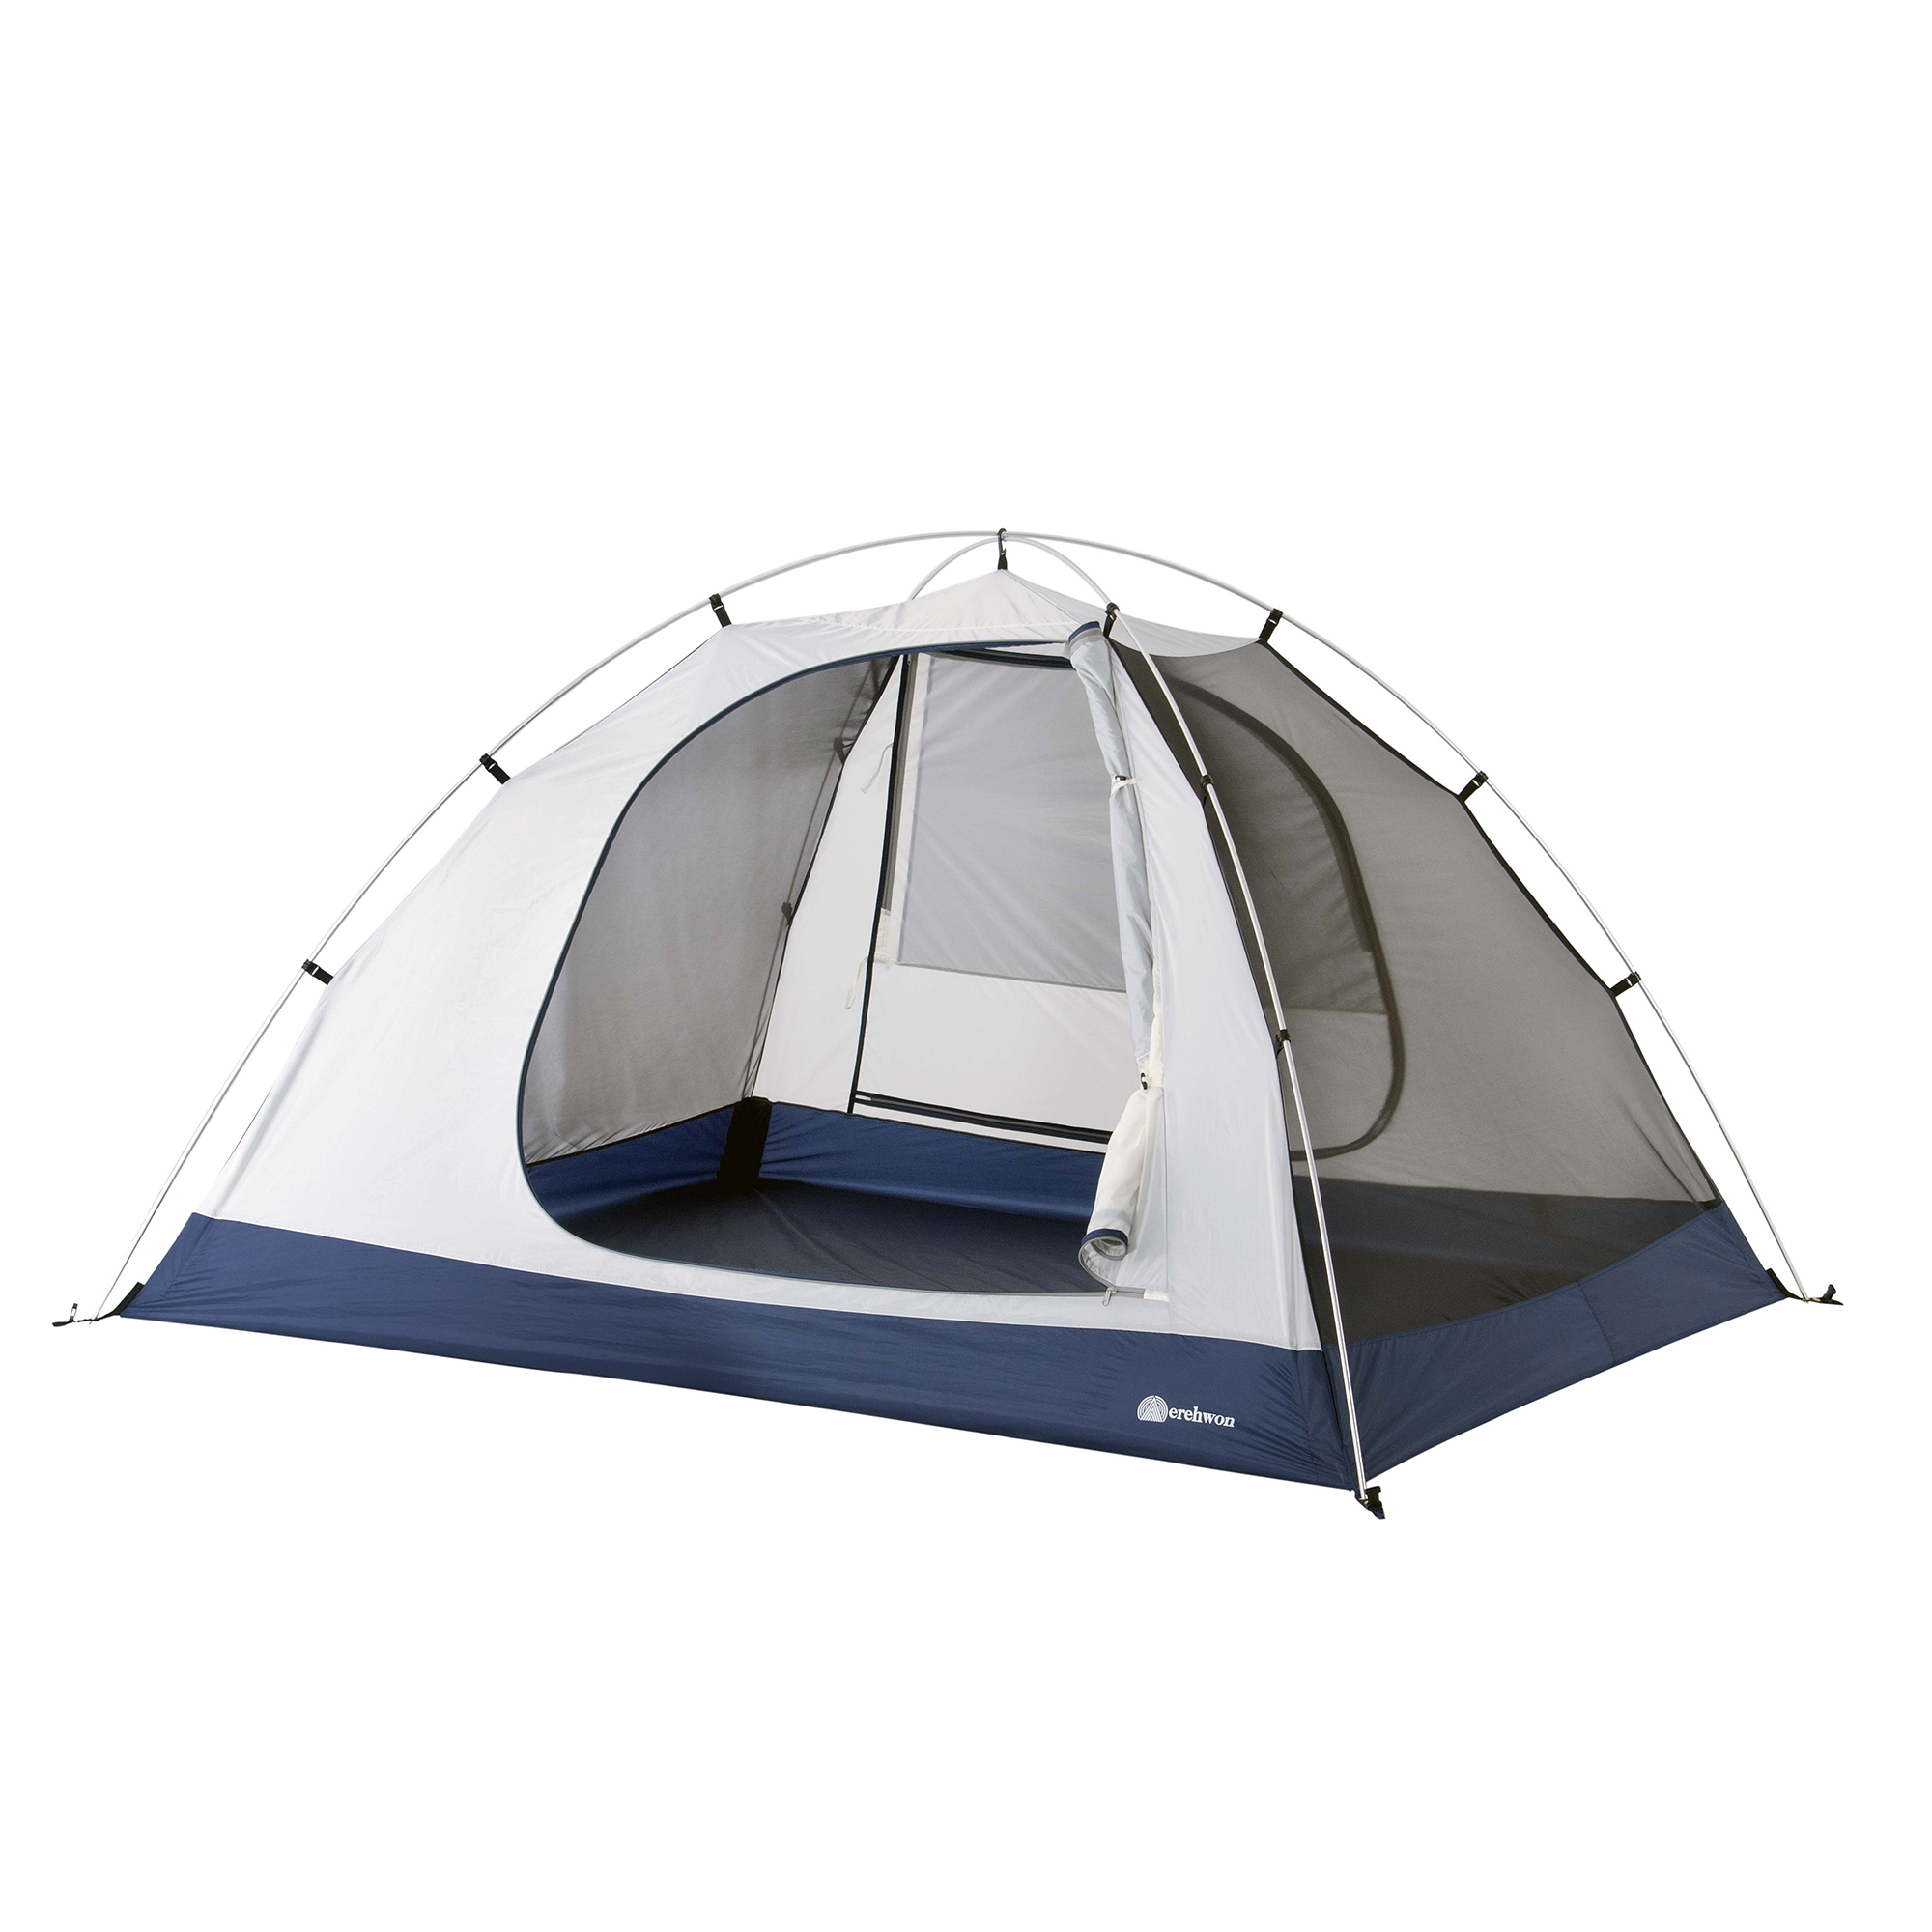 erehwon Northern Lights 4-Person Tent